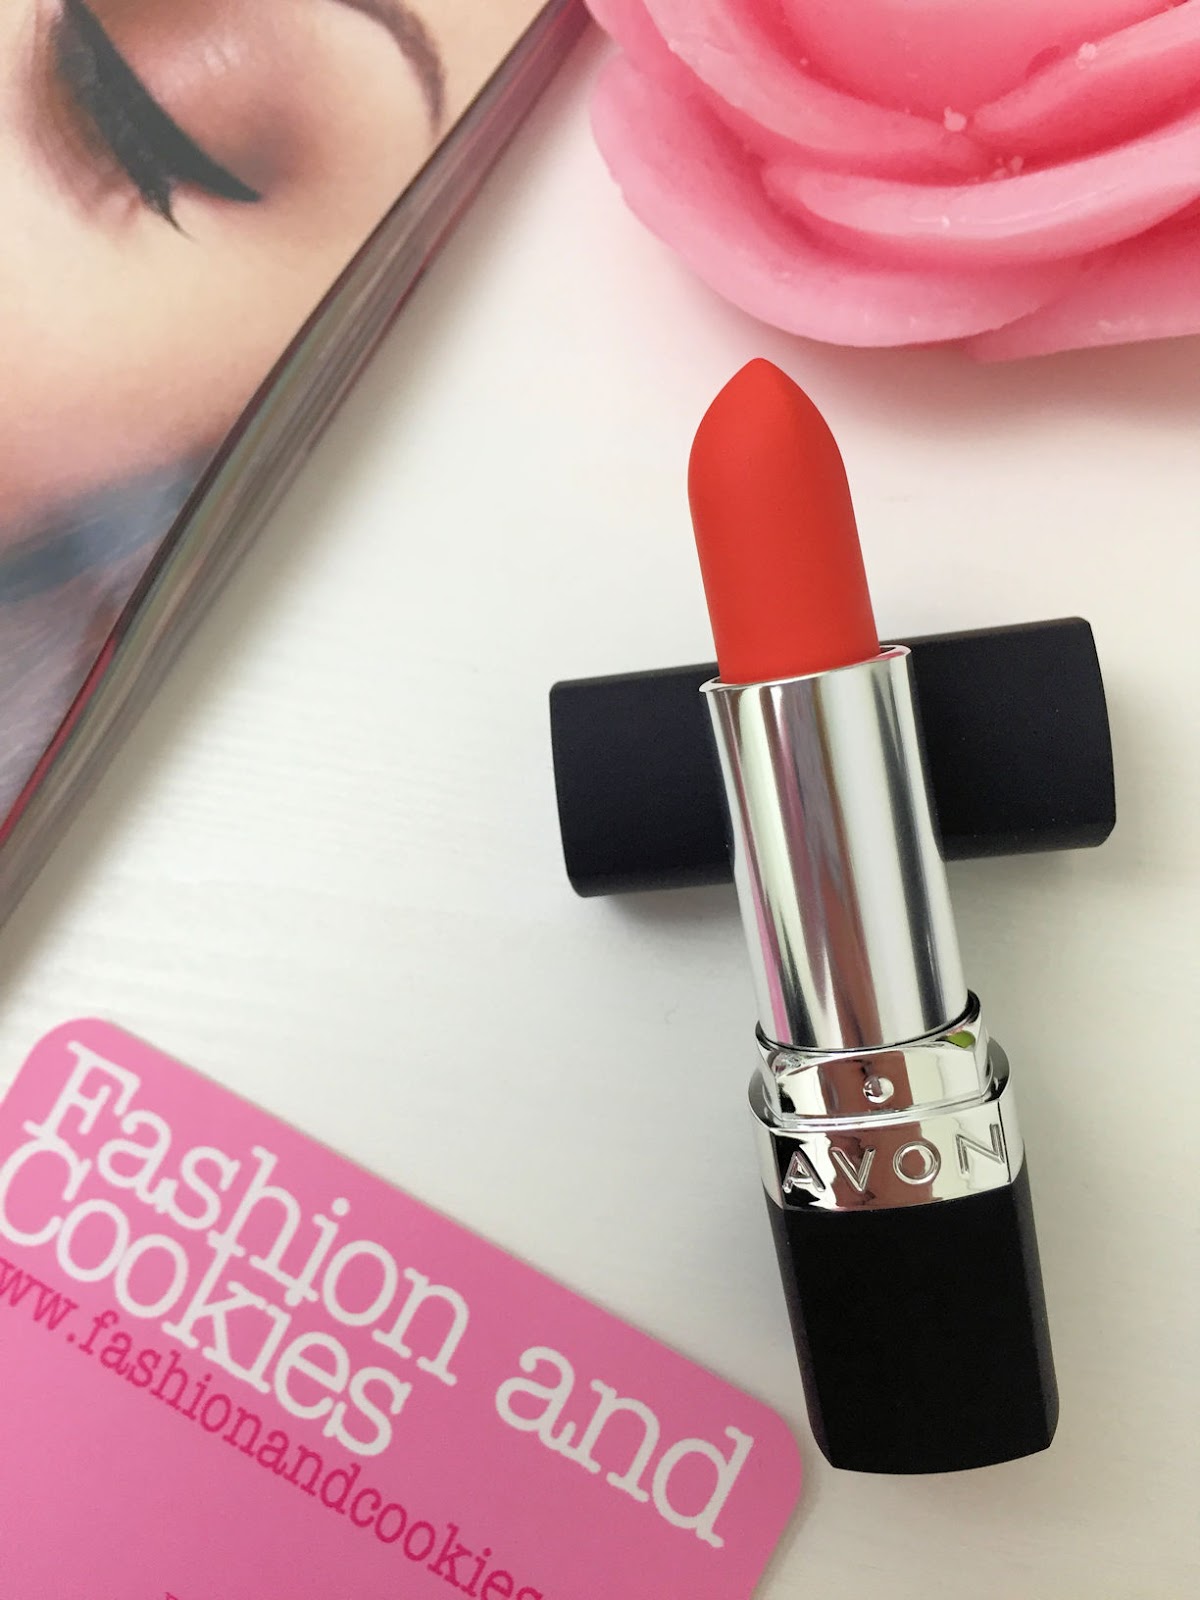 Avon Perfectly Matte Lipstick Absolute Coral on Fashion and Cookies beauty blog, beauty blogger